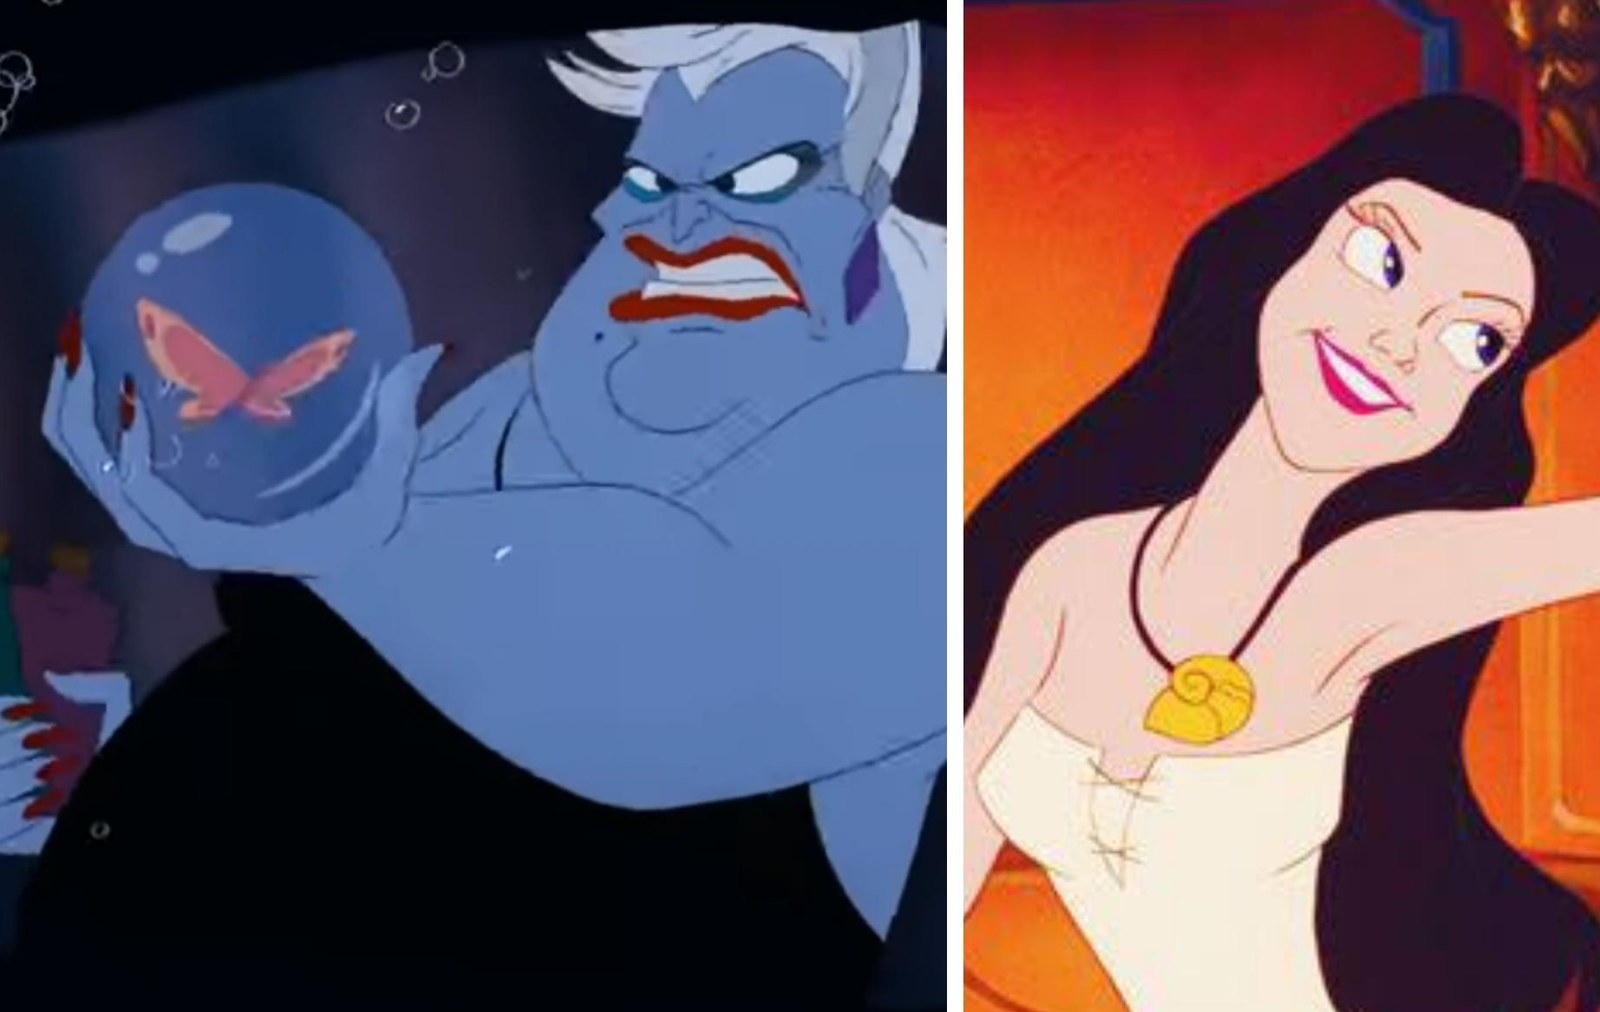 Ursula holding a butterfly in a bubble on the left, and Ursula transformed into Vanessa on the right